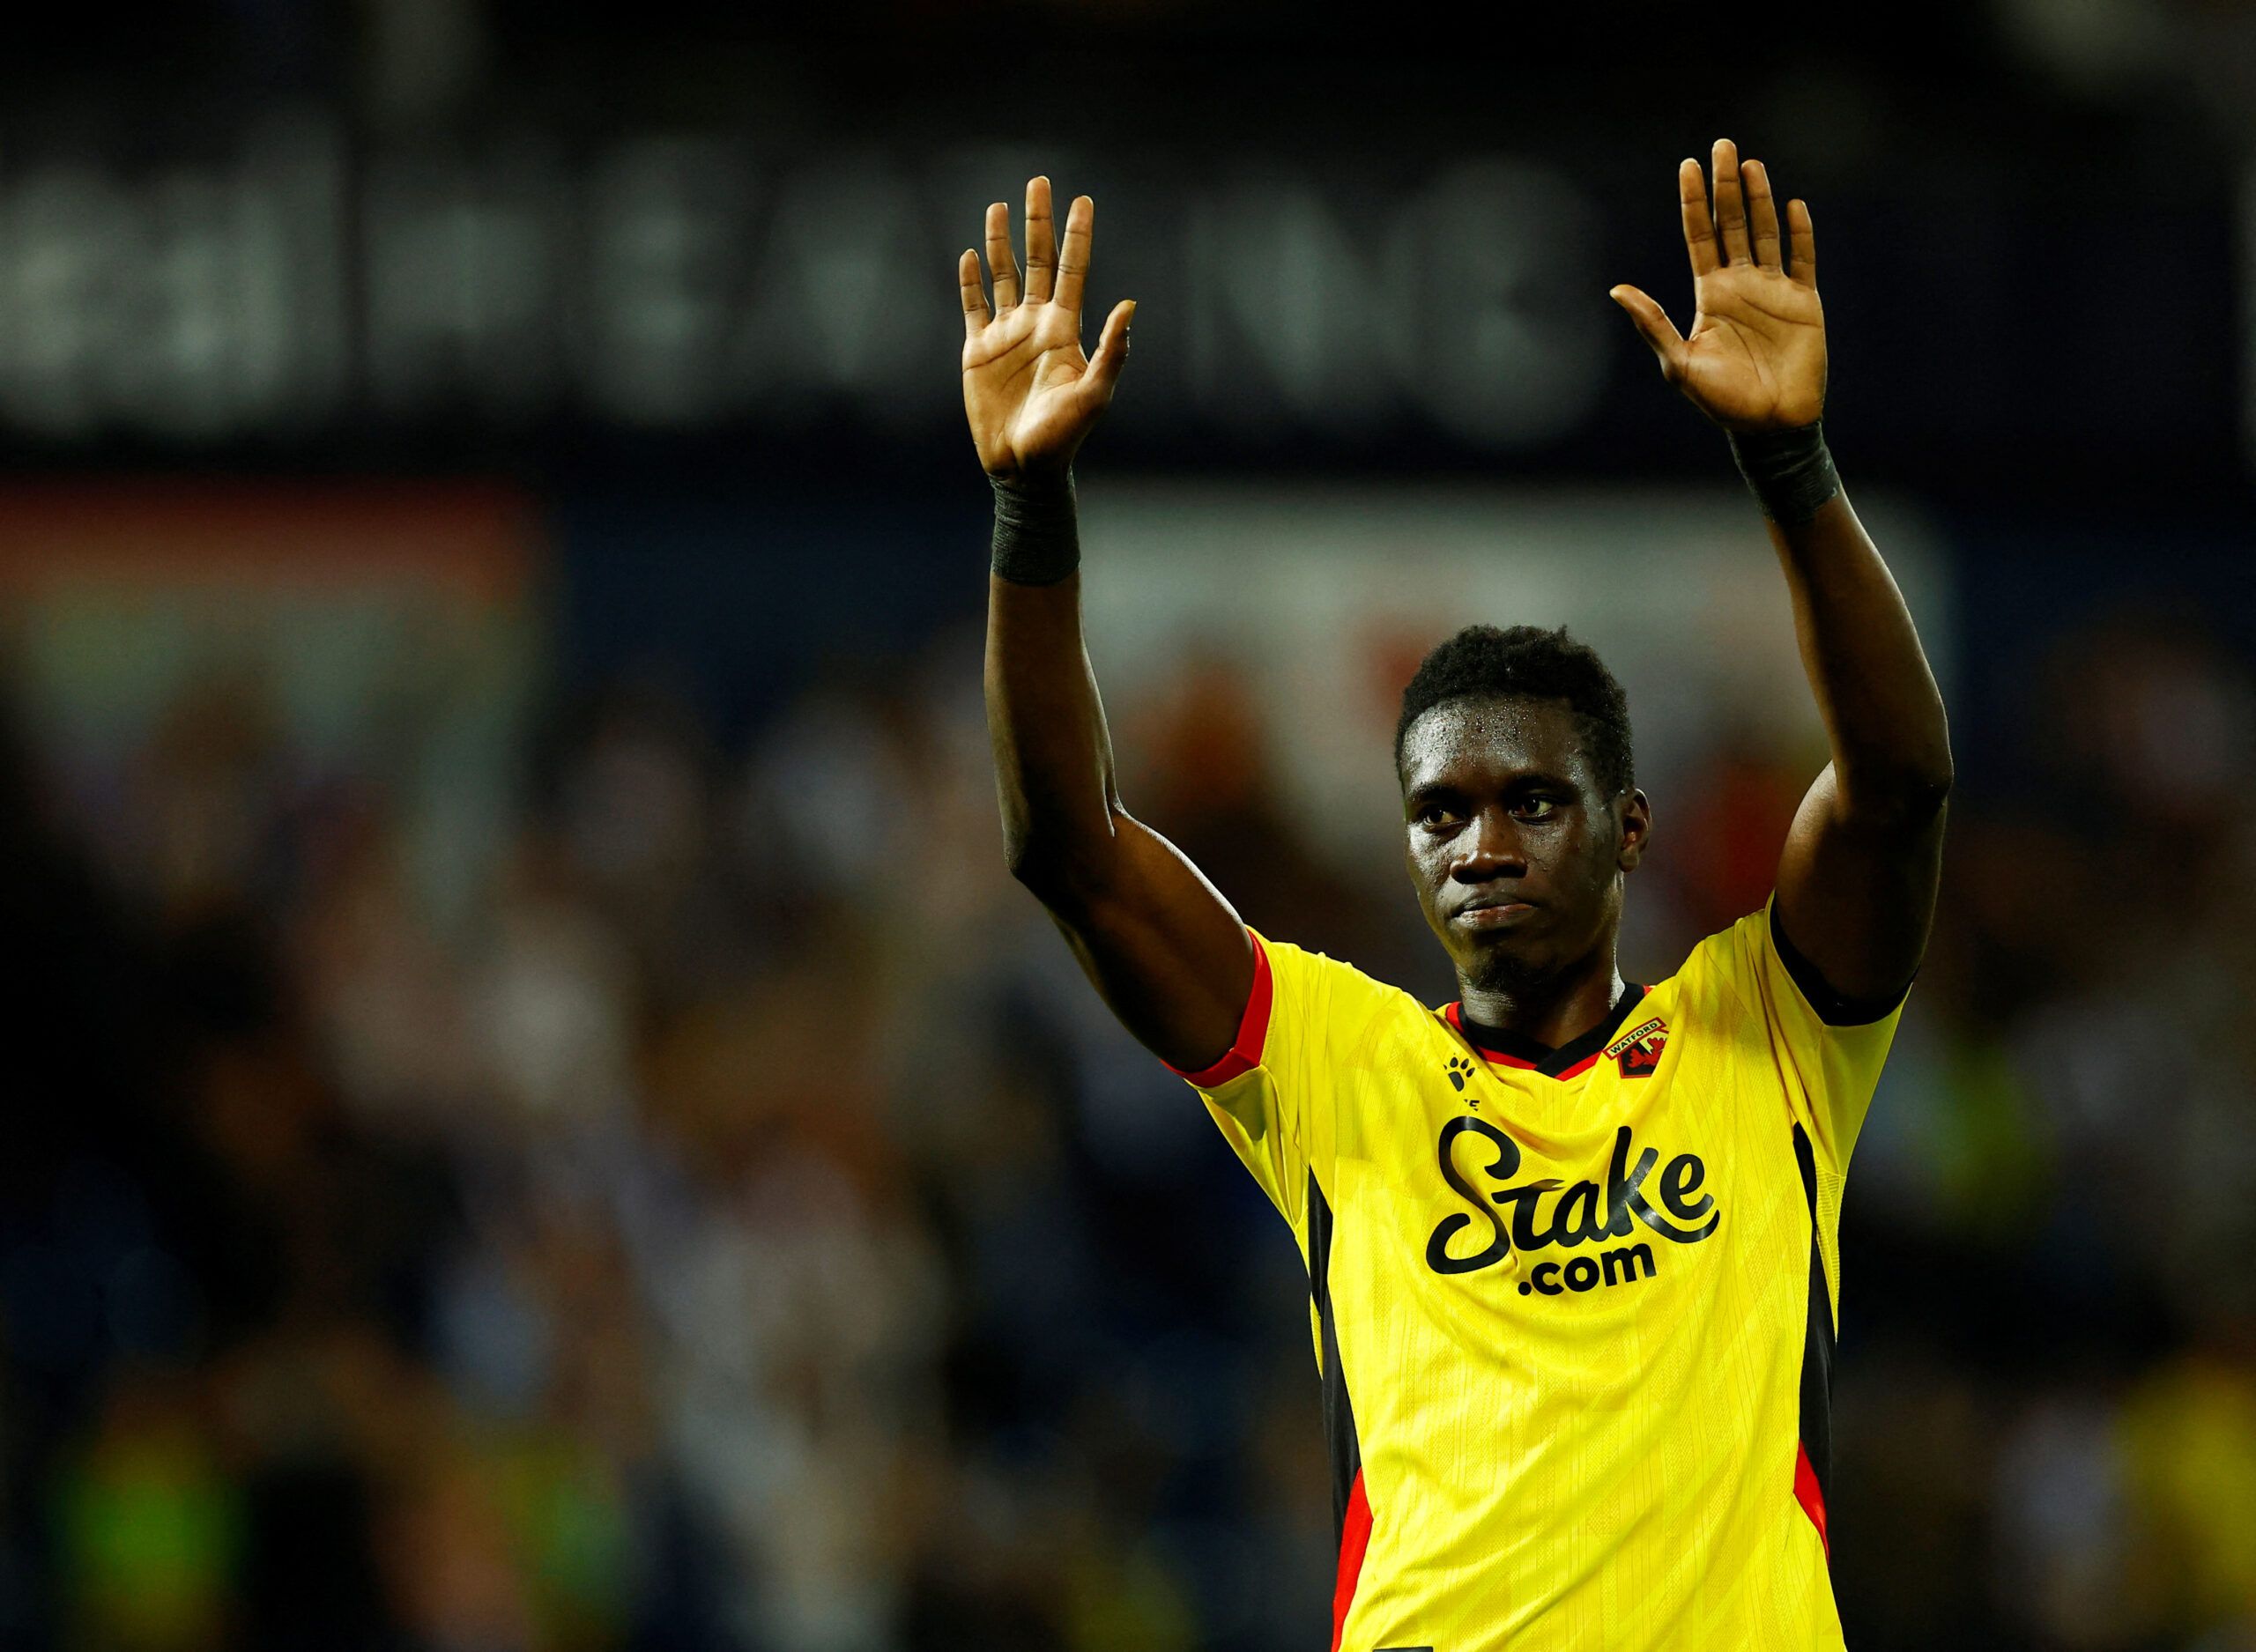 Soccer Football - Championship - West Bromwich Albion v Watford - The Hawthorns, West Bromwich, Britain - August 8, 2022 Watford's Ismaila Sarr acknowledges fans after the match  Action Images/Andrew Boyers  EDITORIAL USE ONLY. No use with unauthorized audio, video, data, fixture lists, club/league logos or 